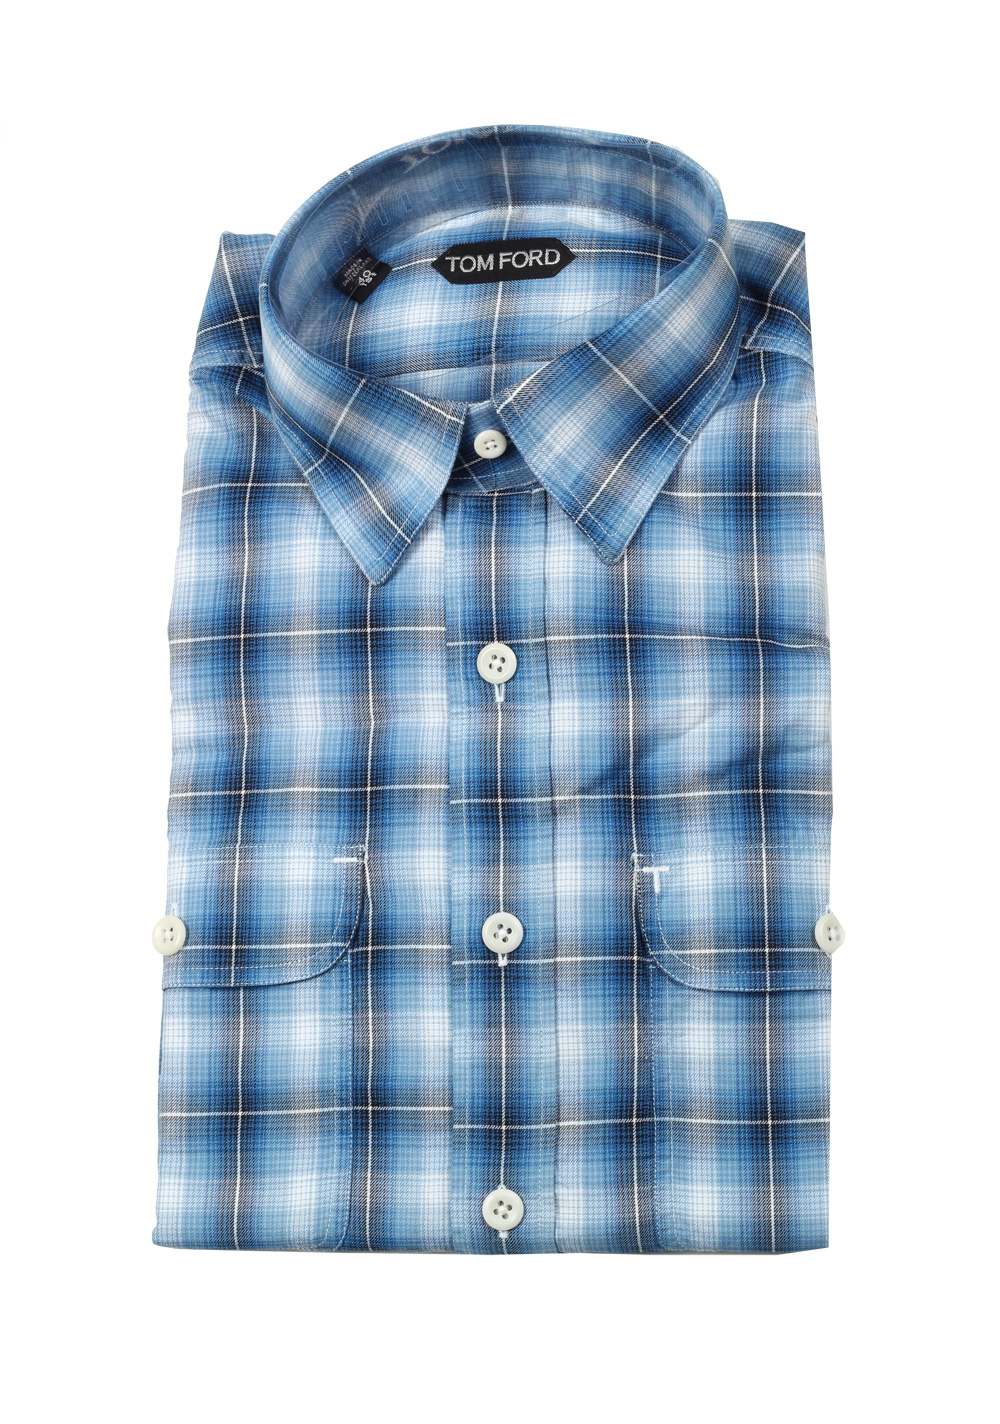 TOM FORD Checked Blue Western Casual Shirt Size 40 / 15,75 U.S. | Costume Limité